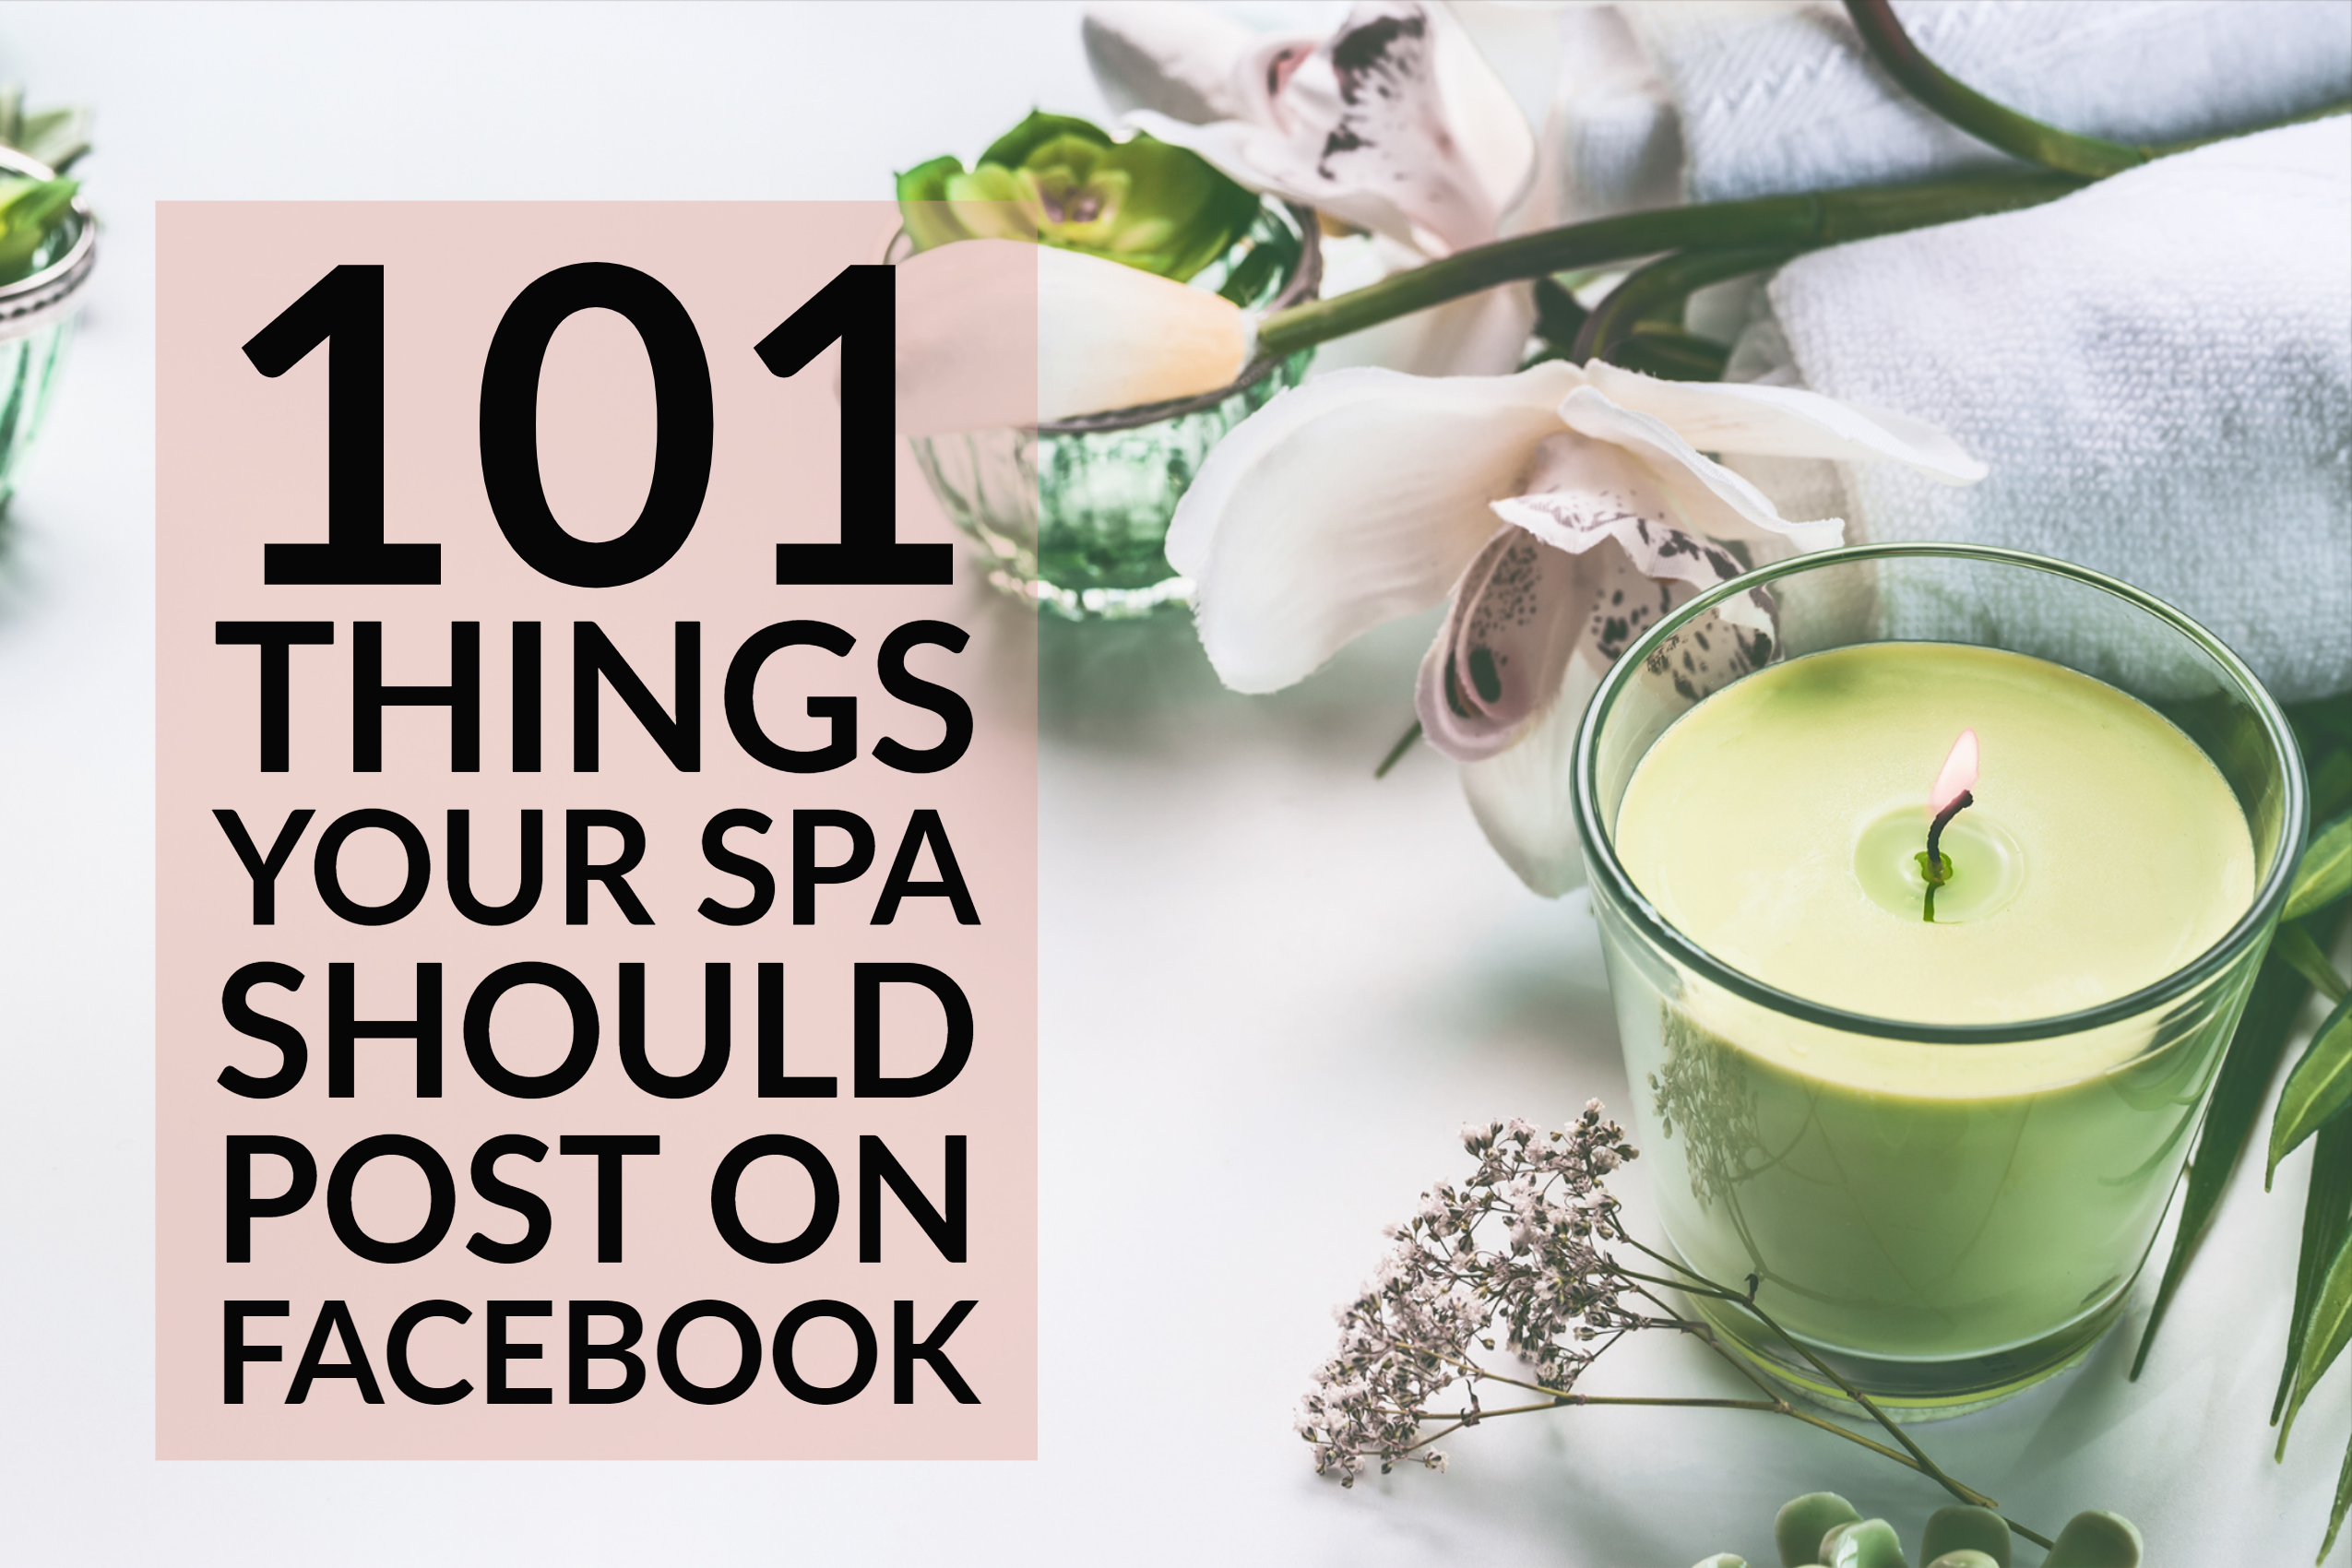 101 Things Your Spa Should Post On Facebook